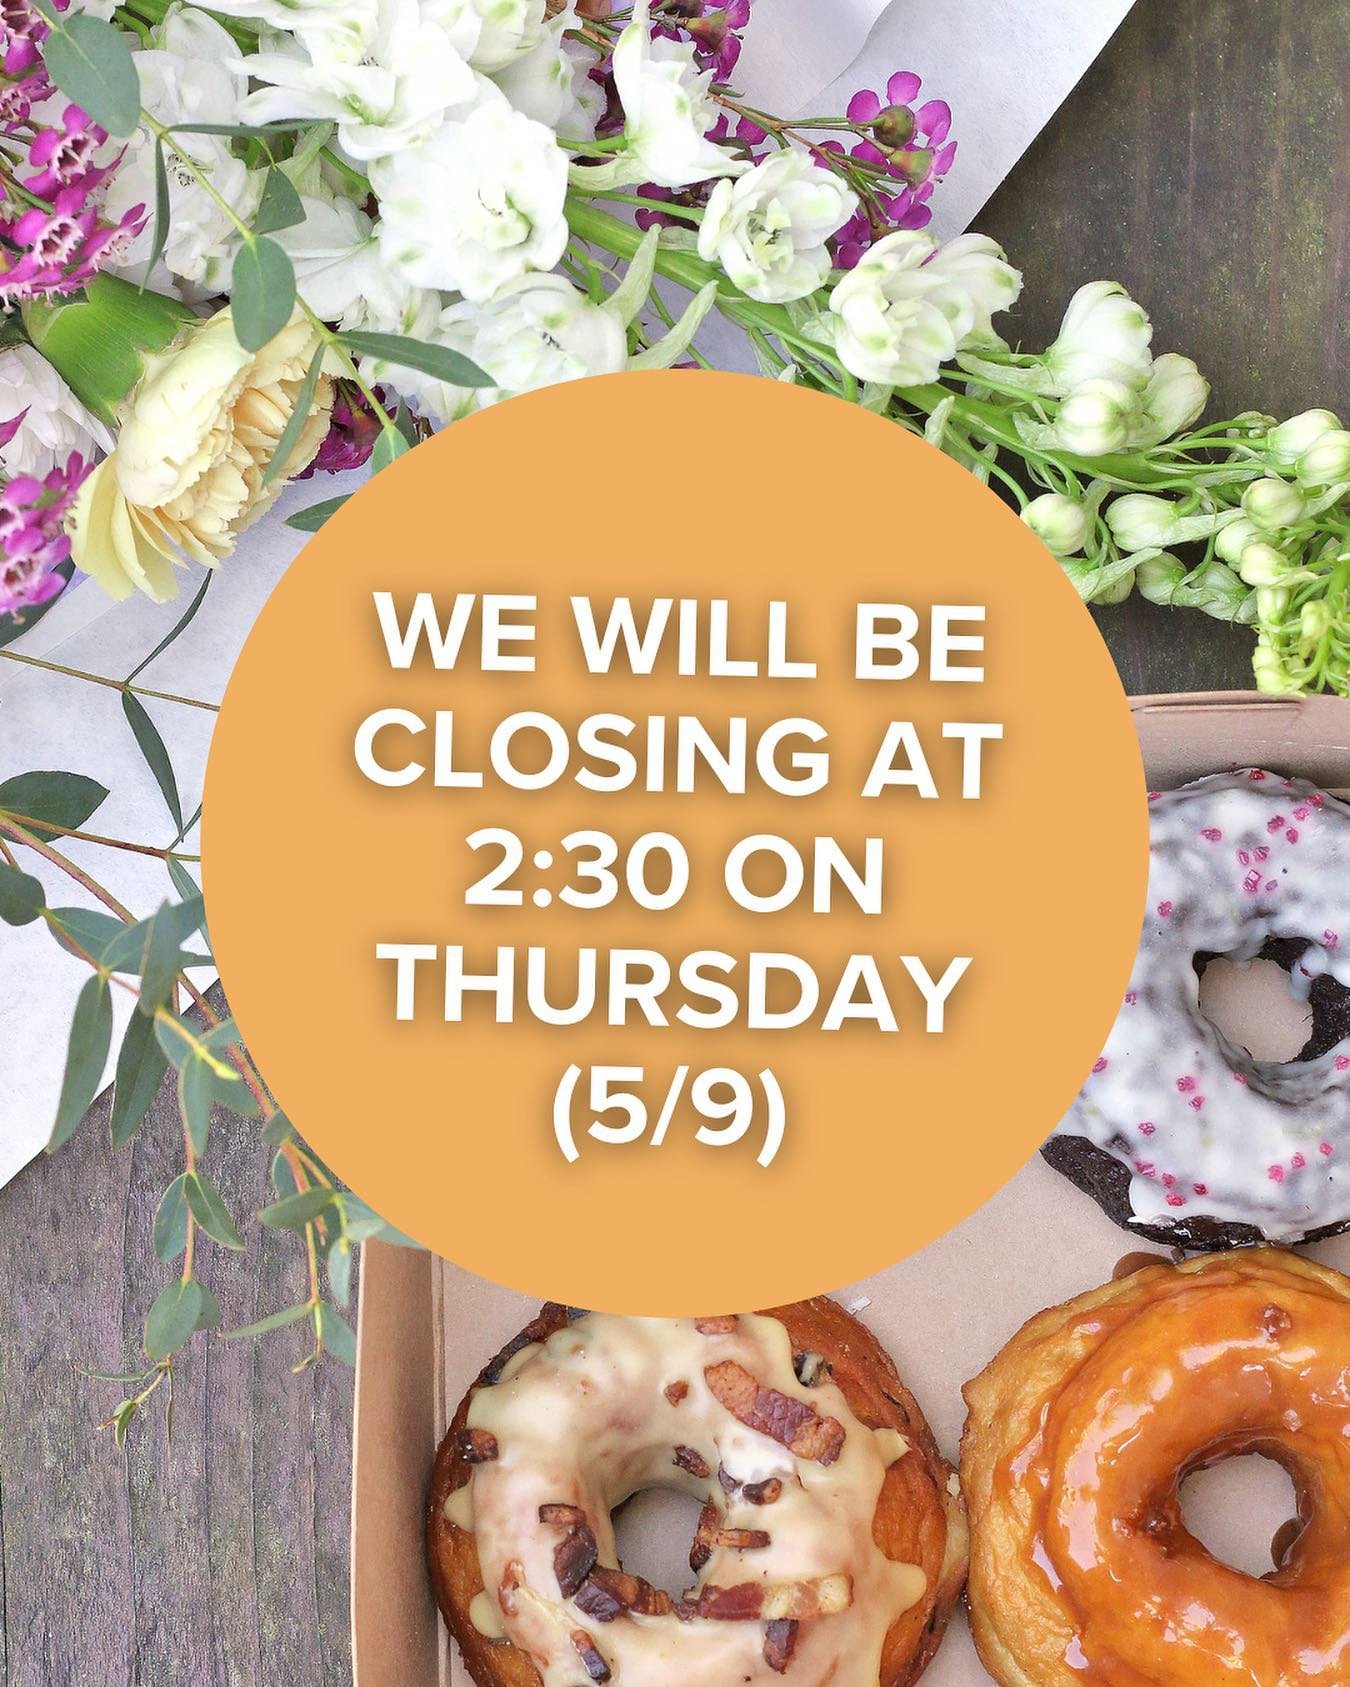 We&rsquo;ll be closing a little early this Thursday so greater things can come! 

Thursday hours: 7am - 2:30pm